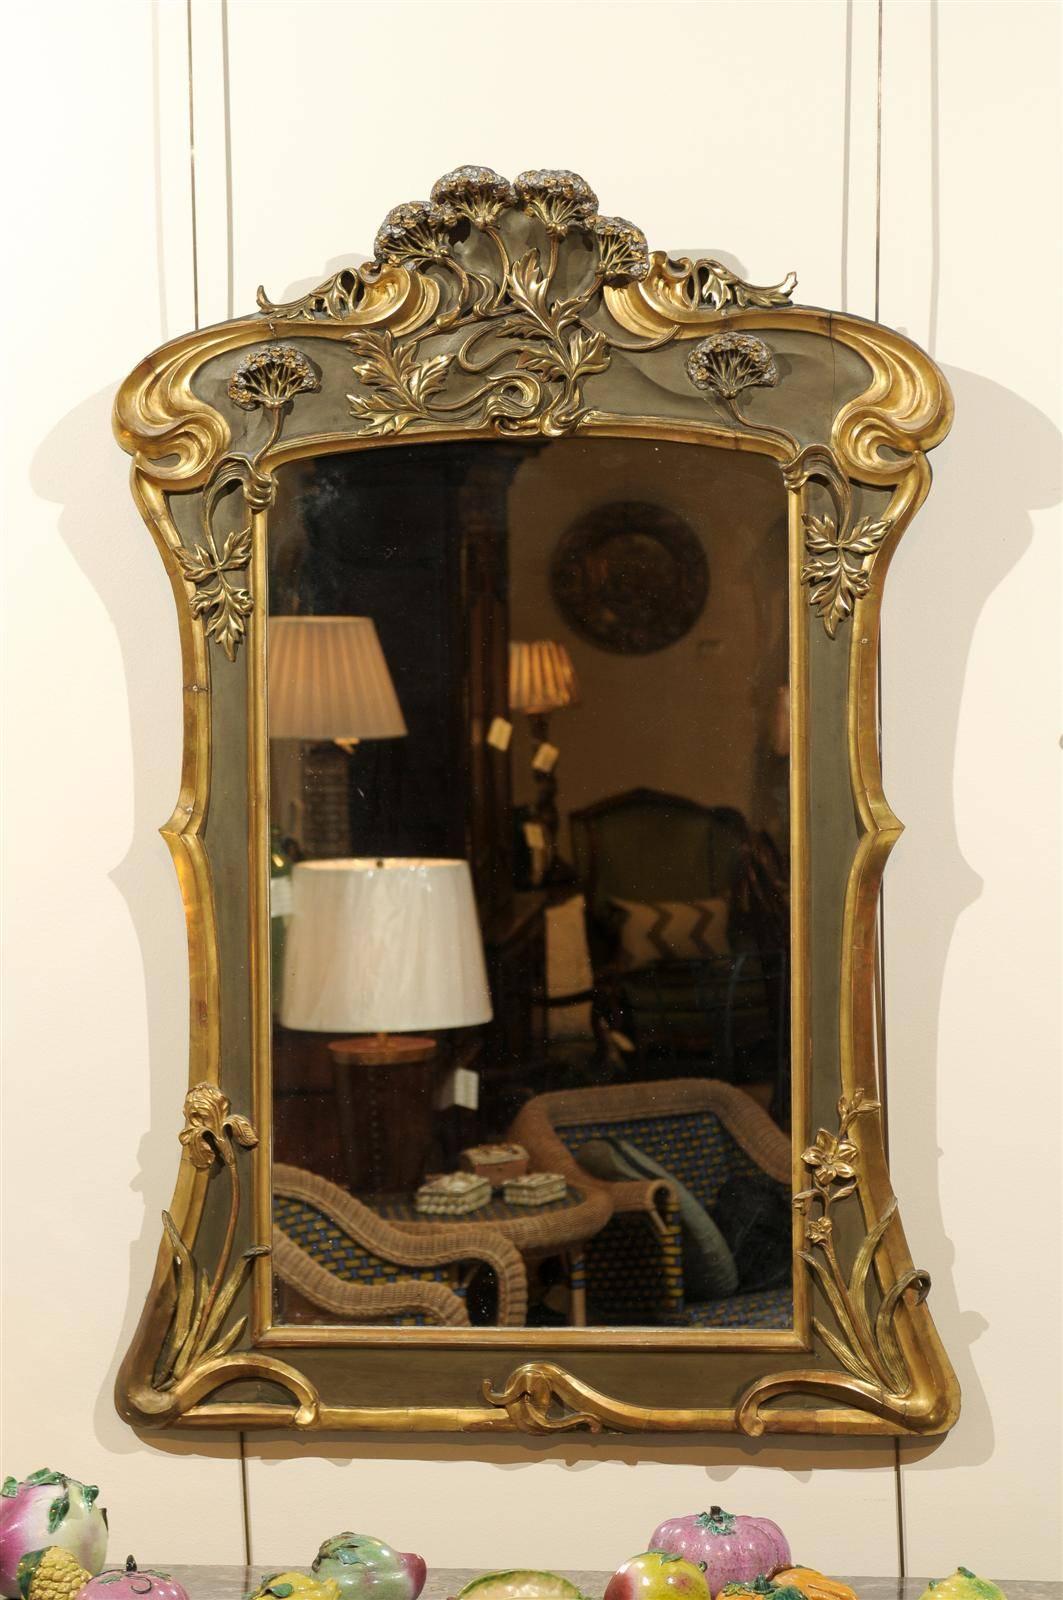 Art Nouveau style mirror in gold and taupe, circa 1950
Flowers, flowers everywhere! Our Art Nouveau style mirror has many flowers that adorn the frame and add a great deal of movement. What fun!